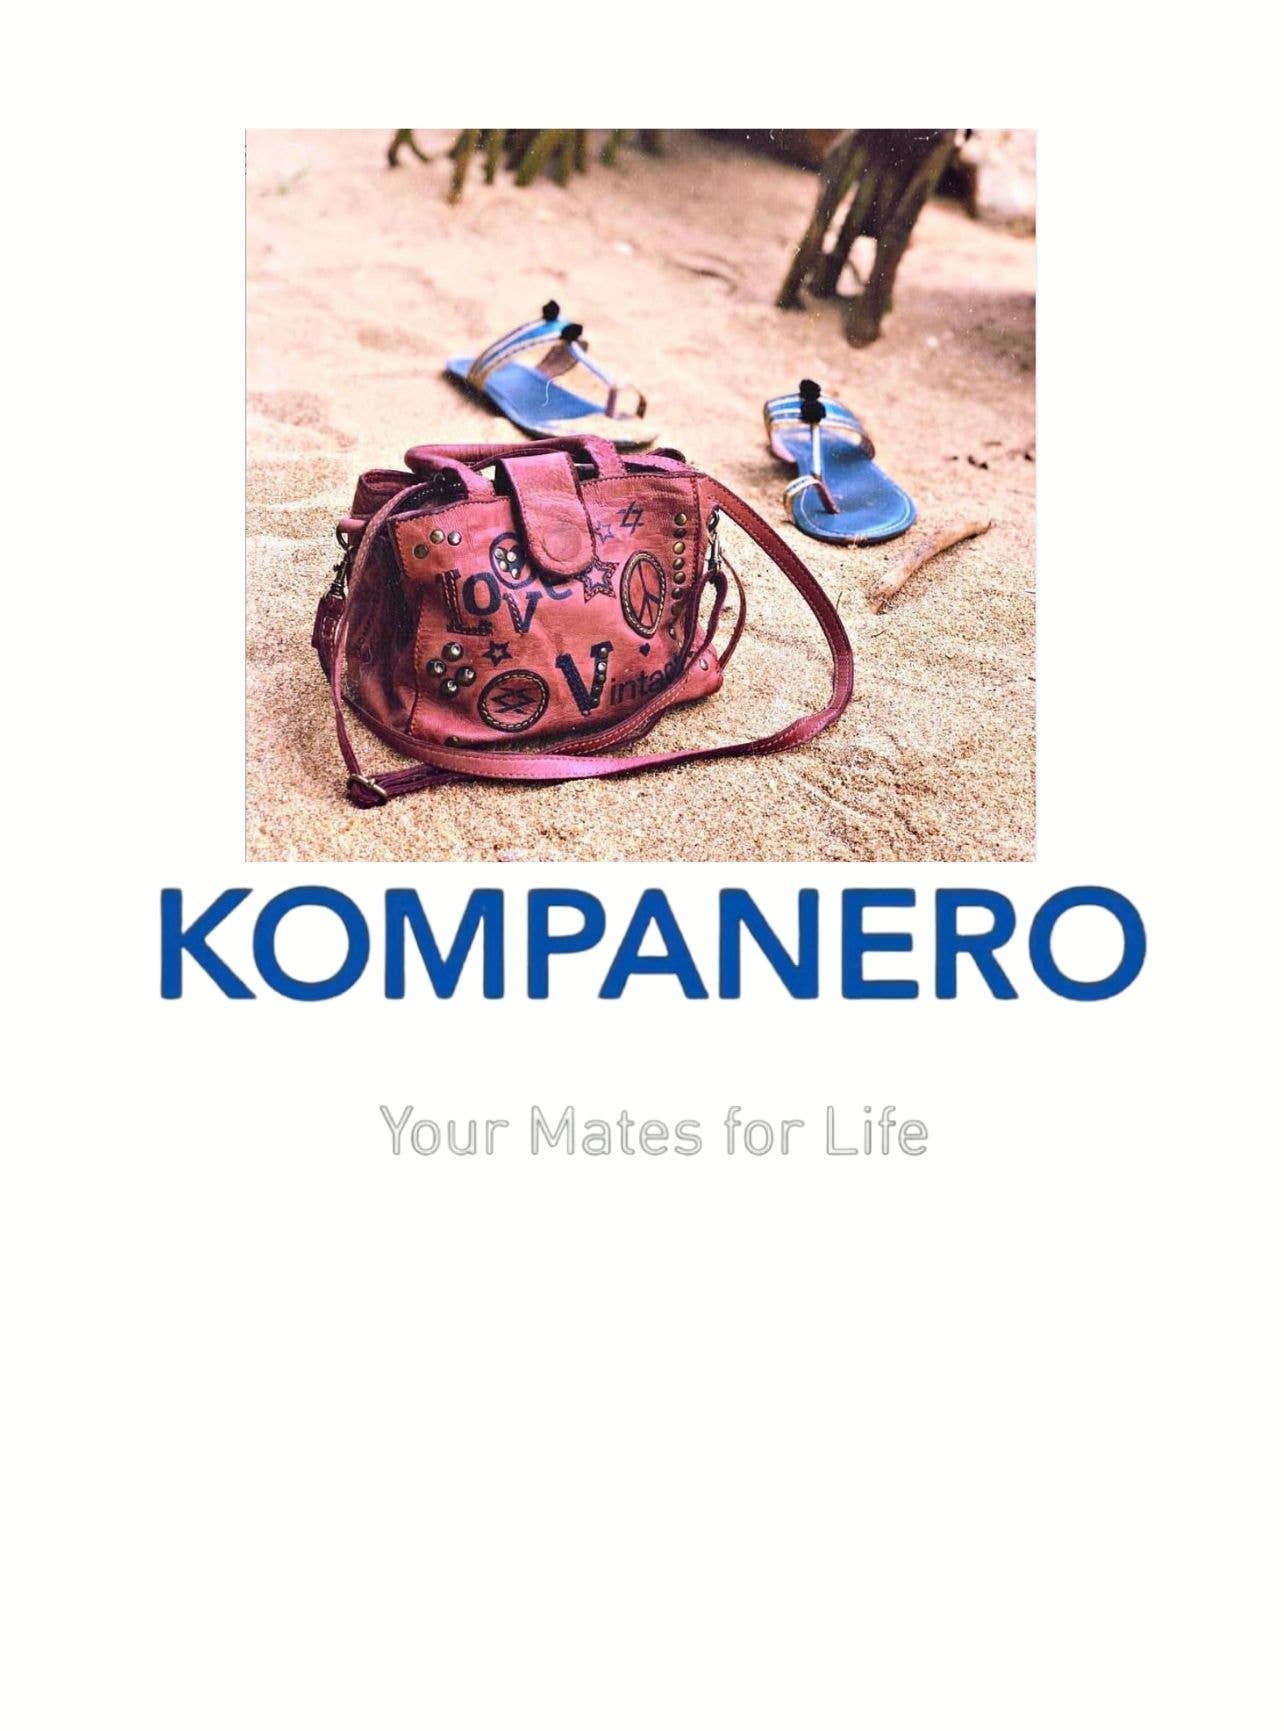 Kompanero - We know you are fabulous, and that's what we want your